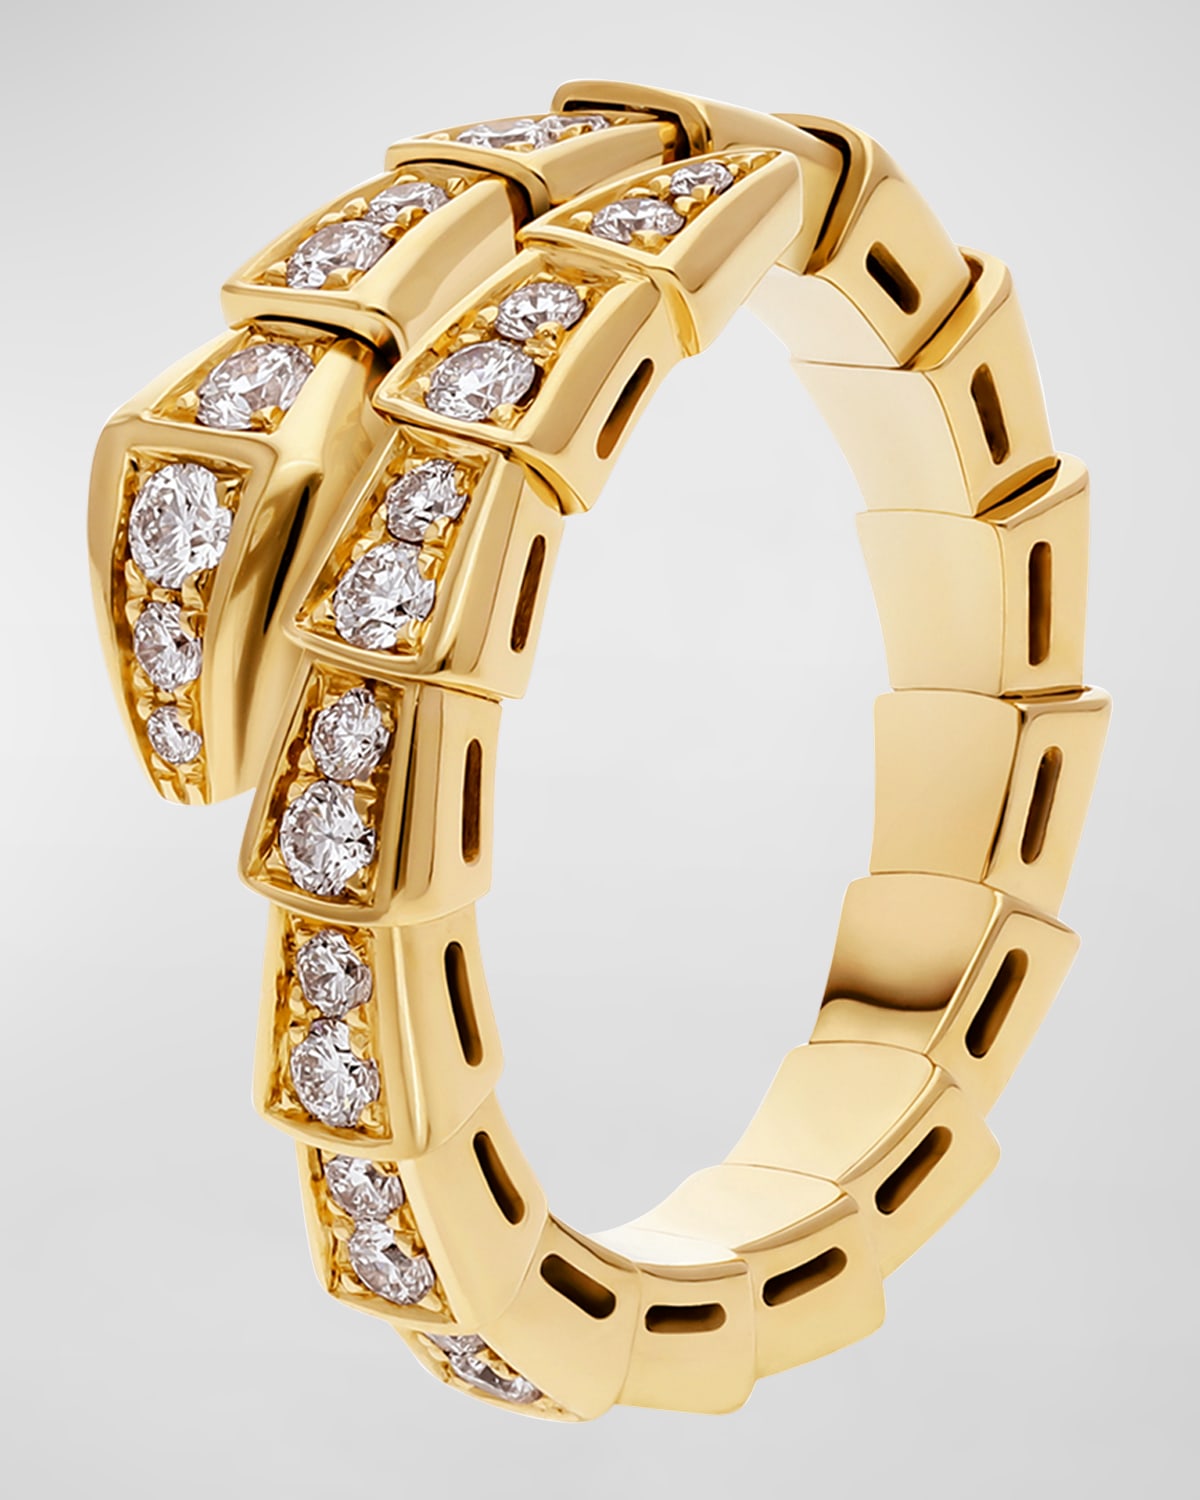 Serpenti Viper Ring in Yellow Gold and Diamonds, Size XL